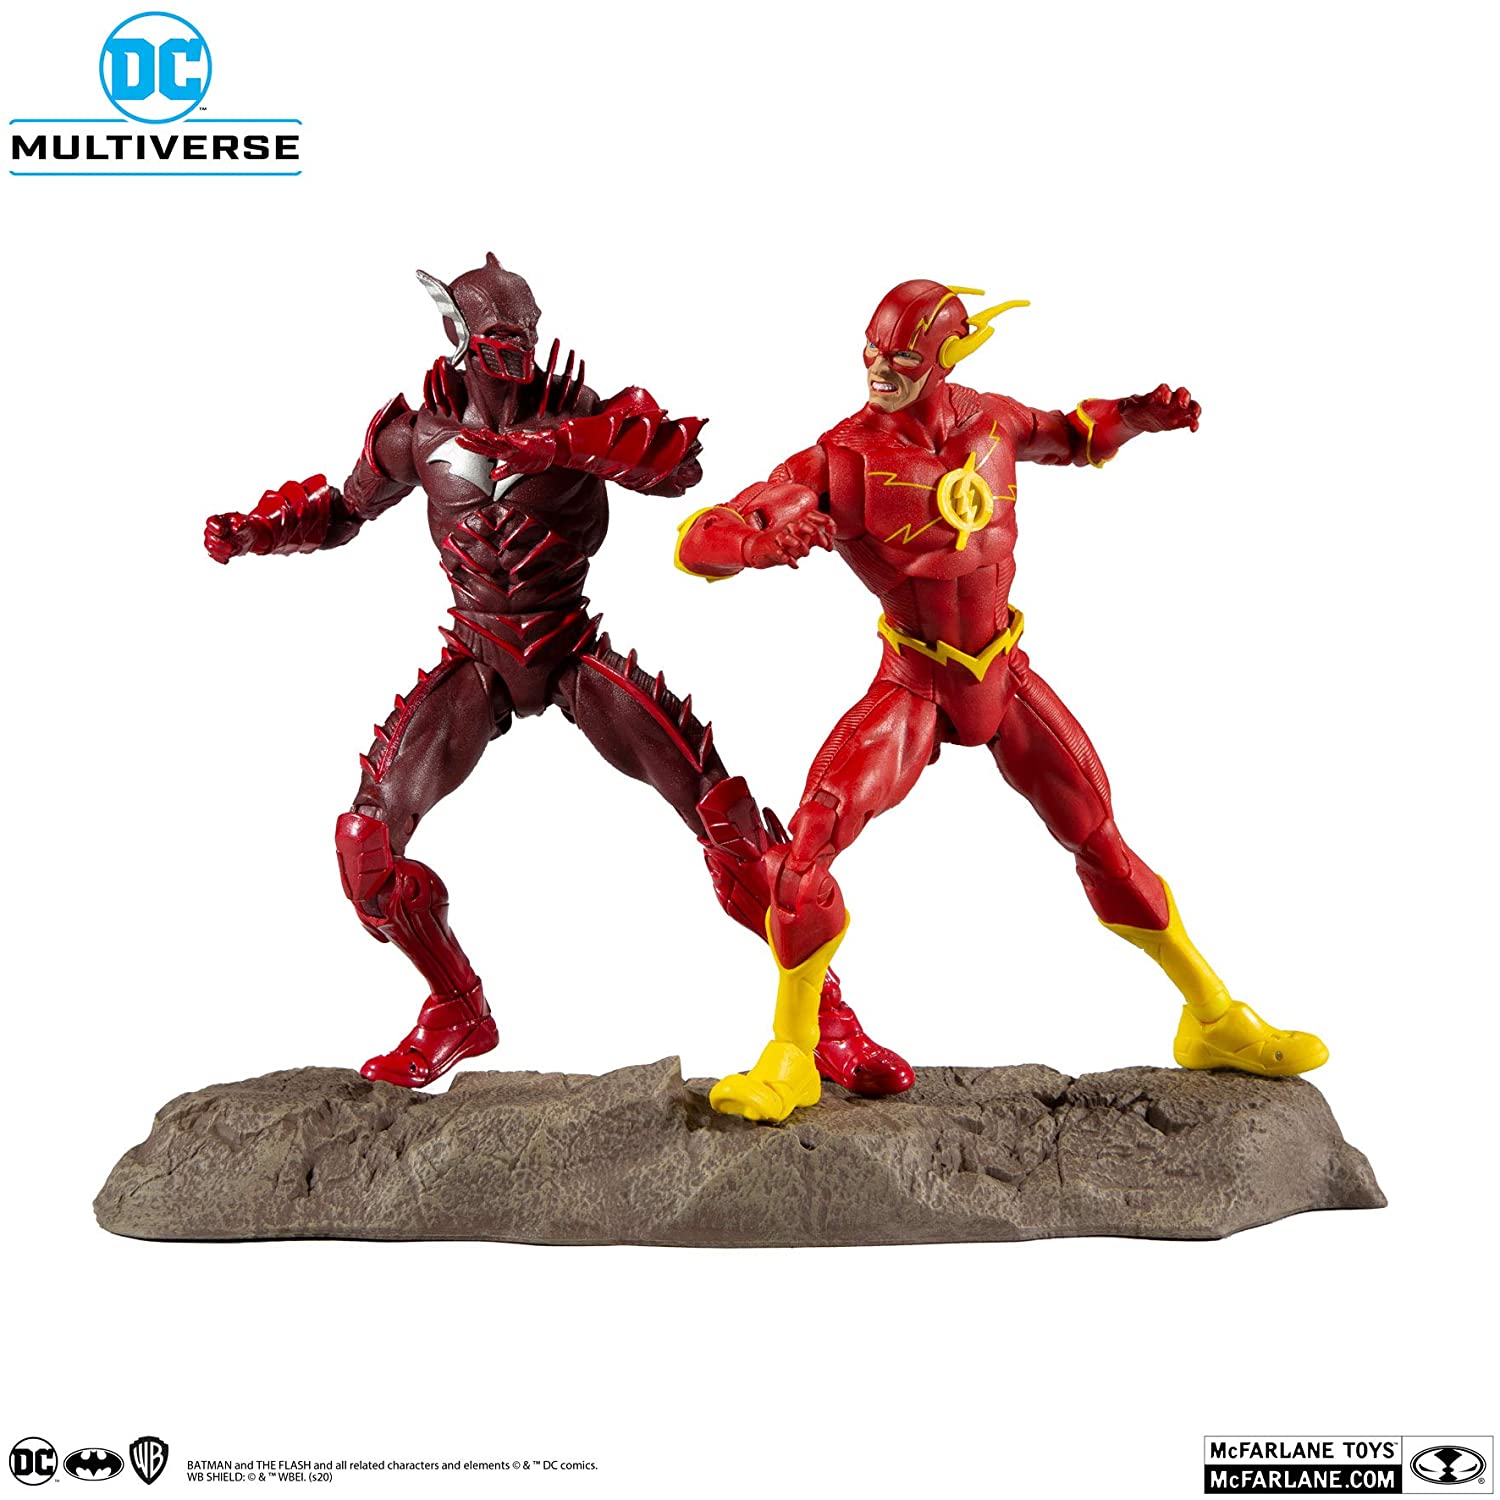 DC Collector Earth-2 Batman Vs Flash 7-Inch Scale Action Figure 2-Pack